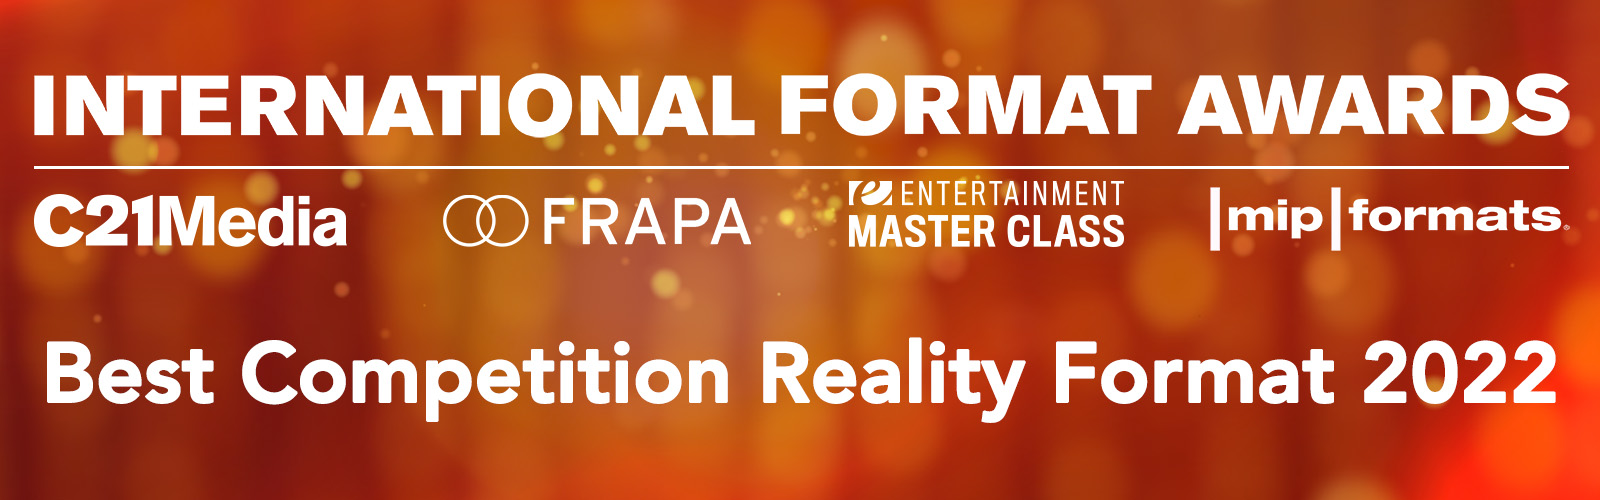 IFA 2022 - Best Competition Reality Format Banner